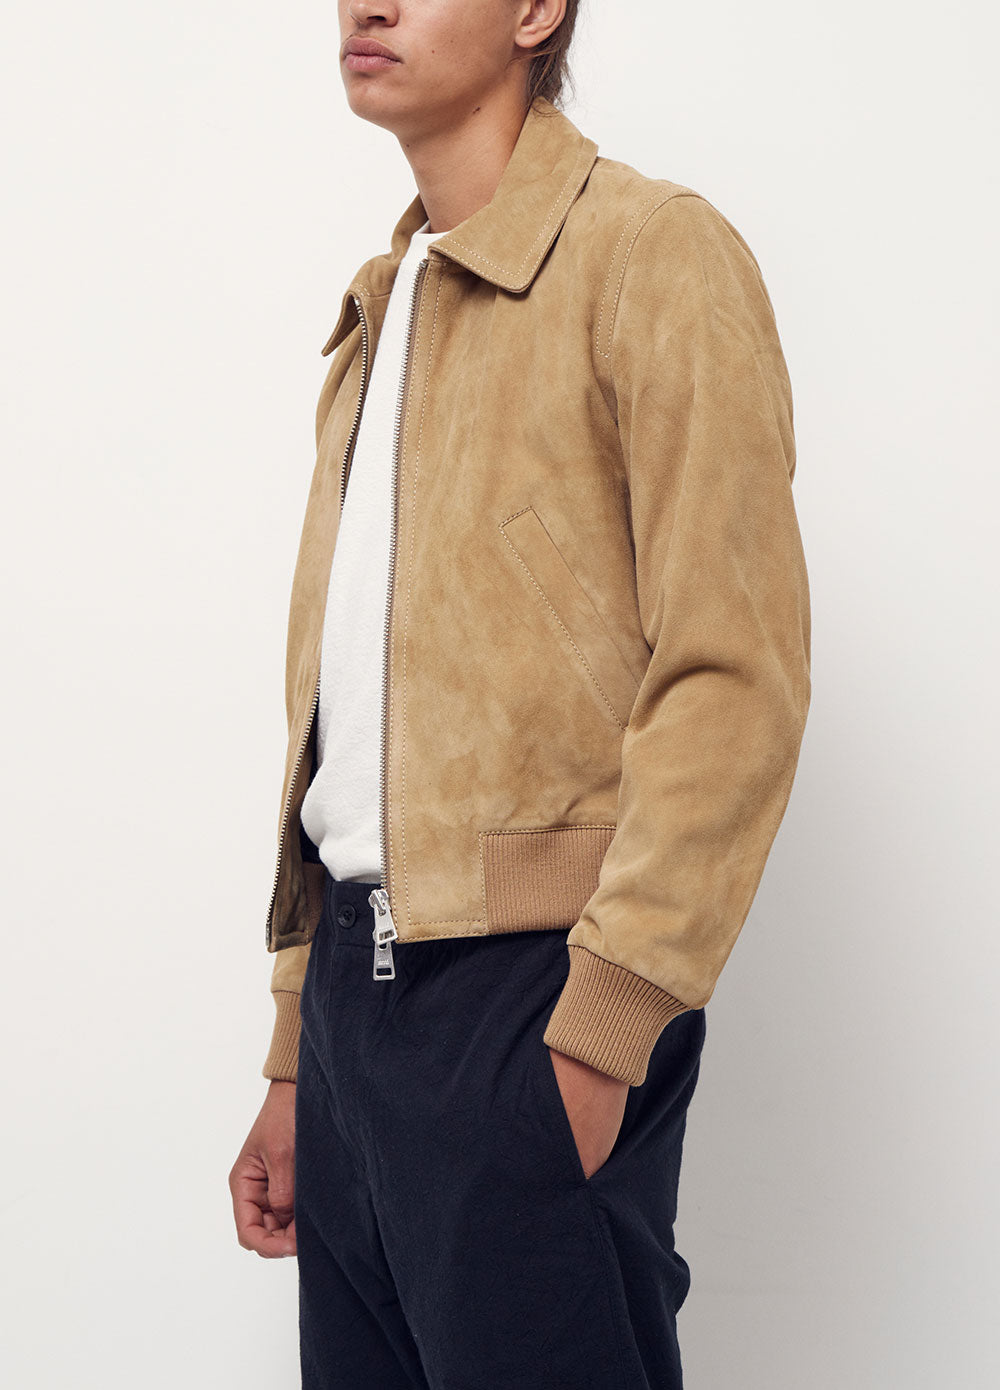 Zipped Suede Jacket